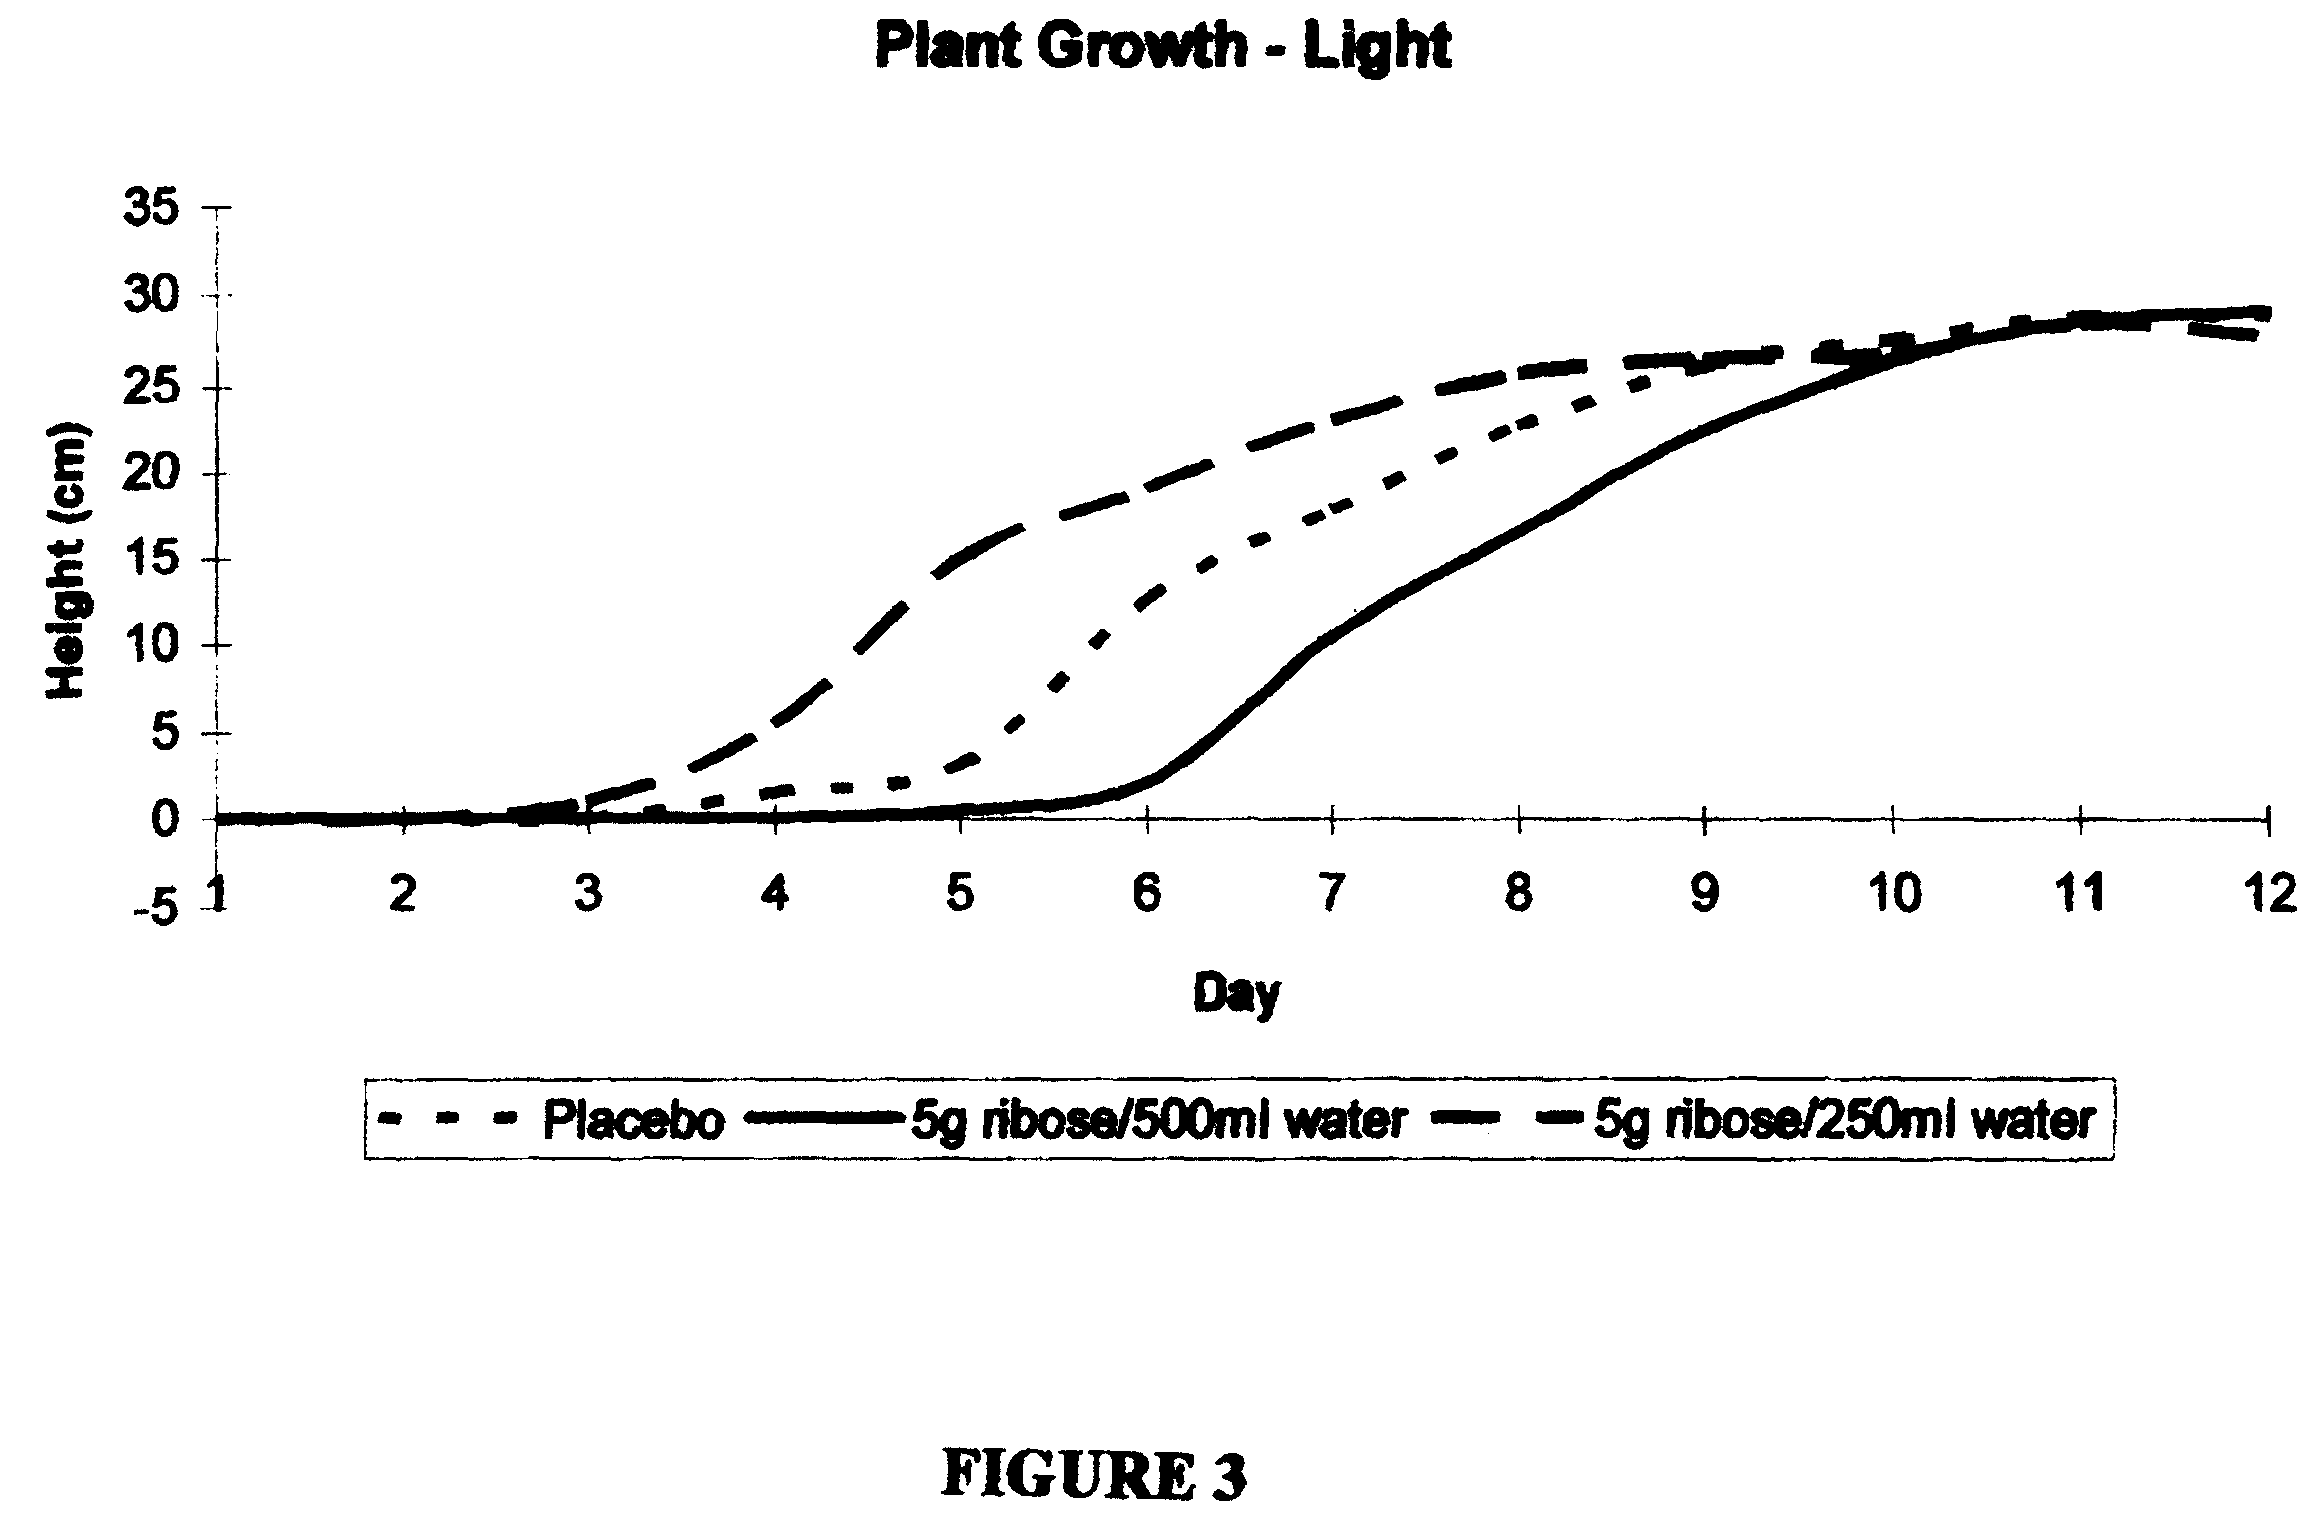 Use of ribose to enhance plant growth